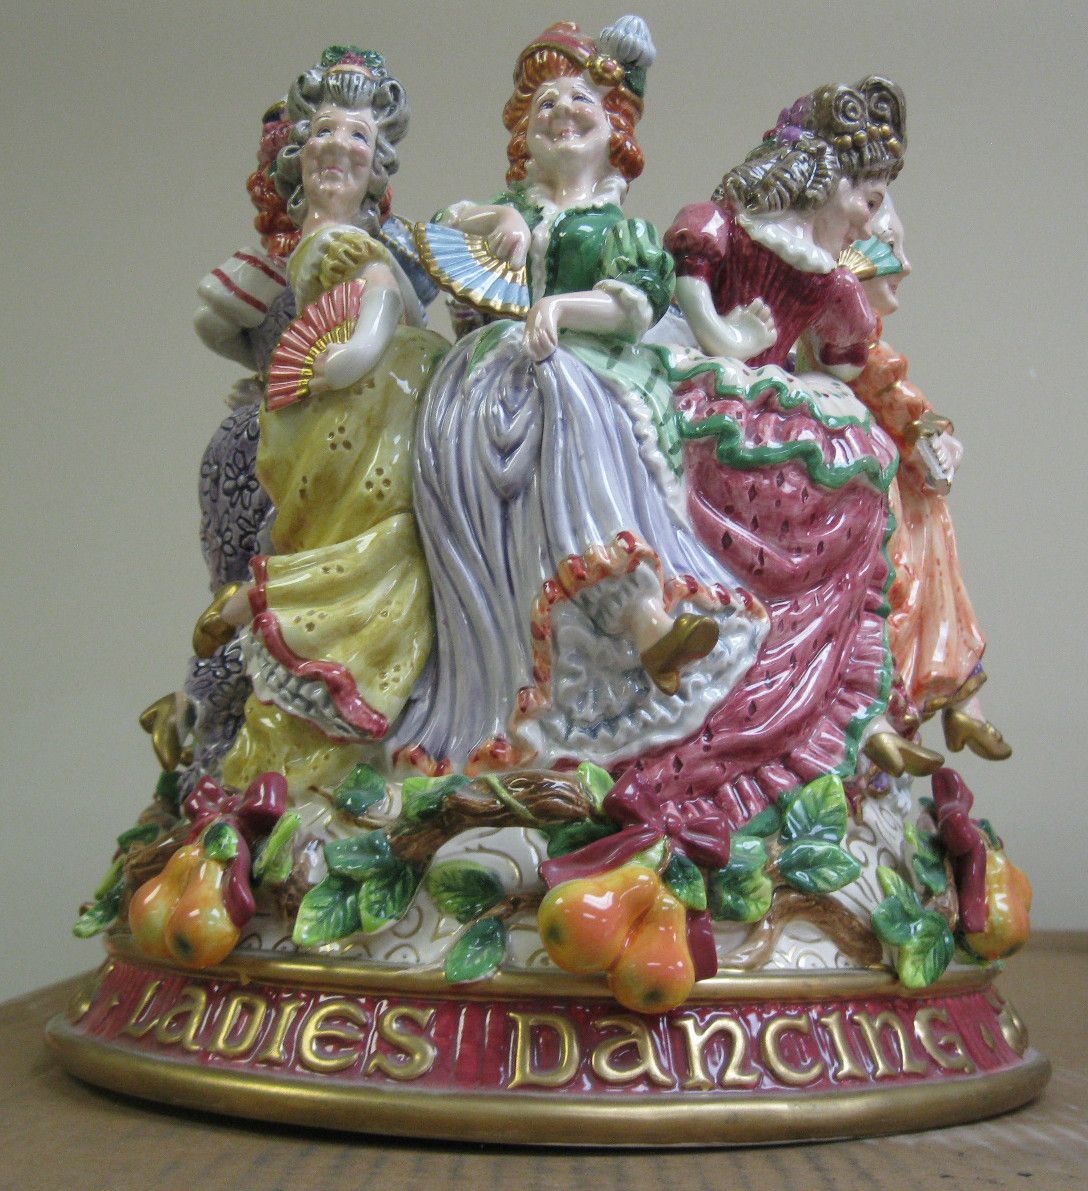 FITZ AND FLOYD 12 DAYS OF CHRISTMAS VASE 9 LADIES DANCING ITEM WITH 3